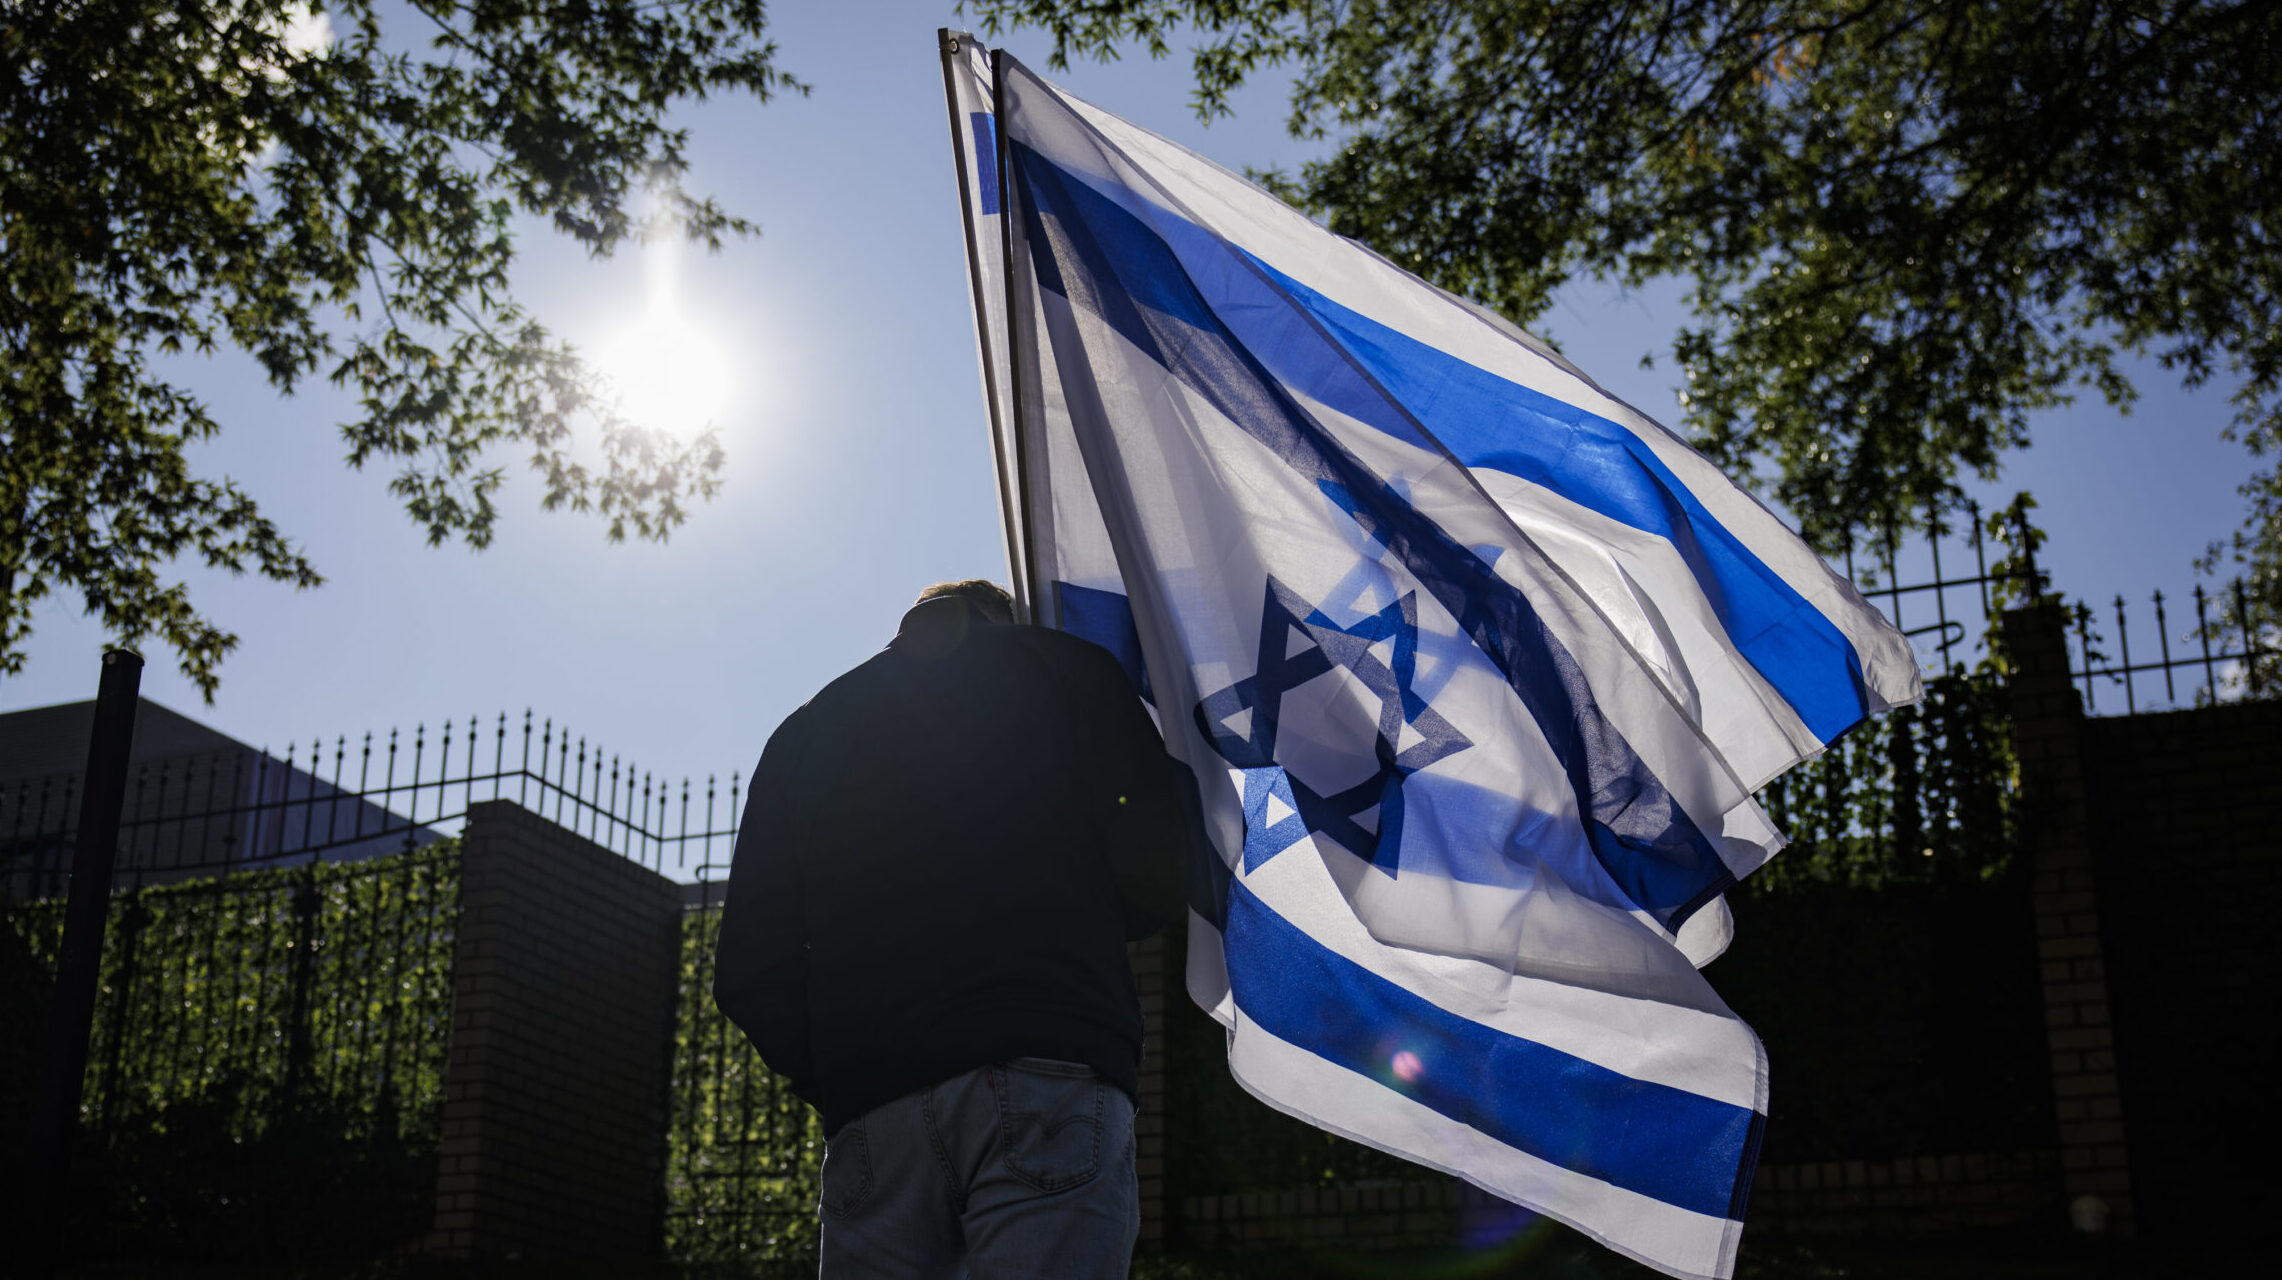 Indianapolis Jewish community joins march in D.C. in support of Israel